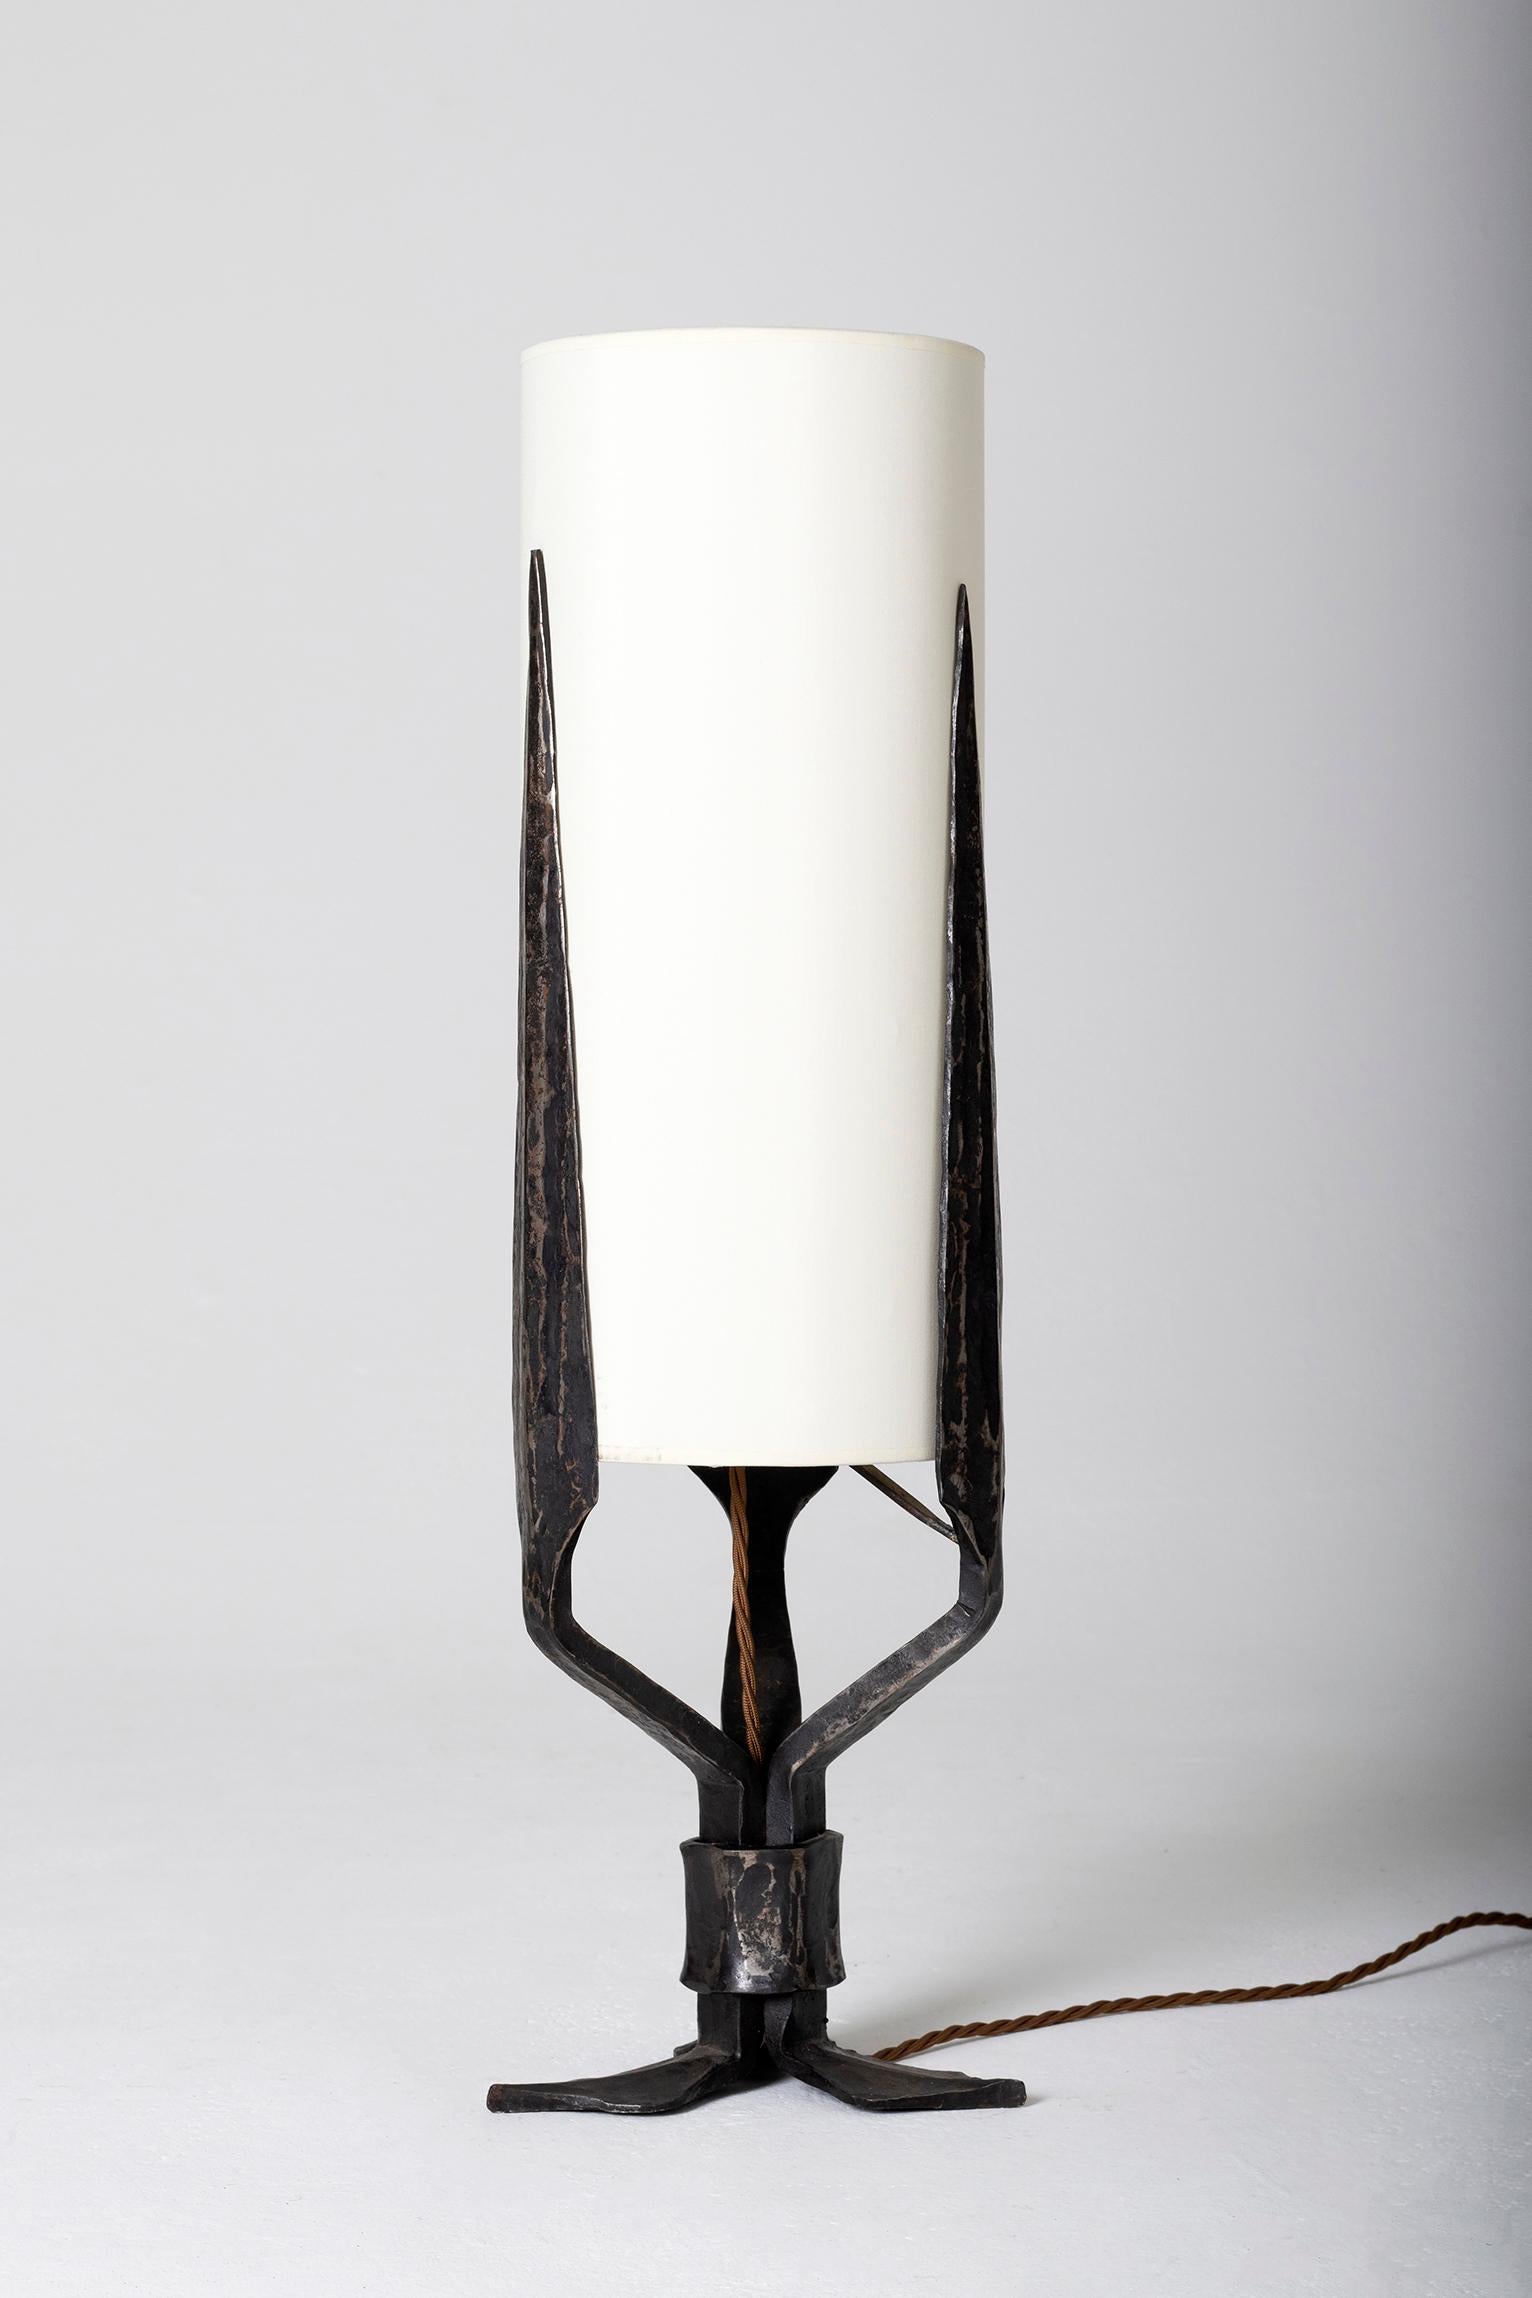 An Art Deco wrought iron table lamp, of stylized palms and leaves design
France, circa 1930.